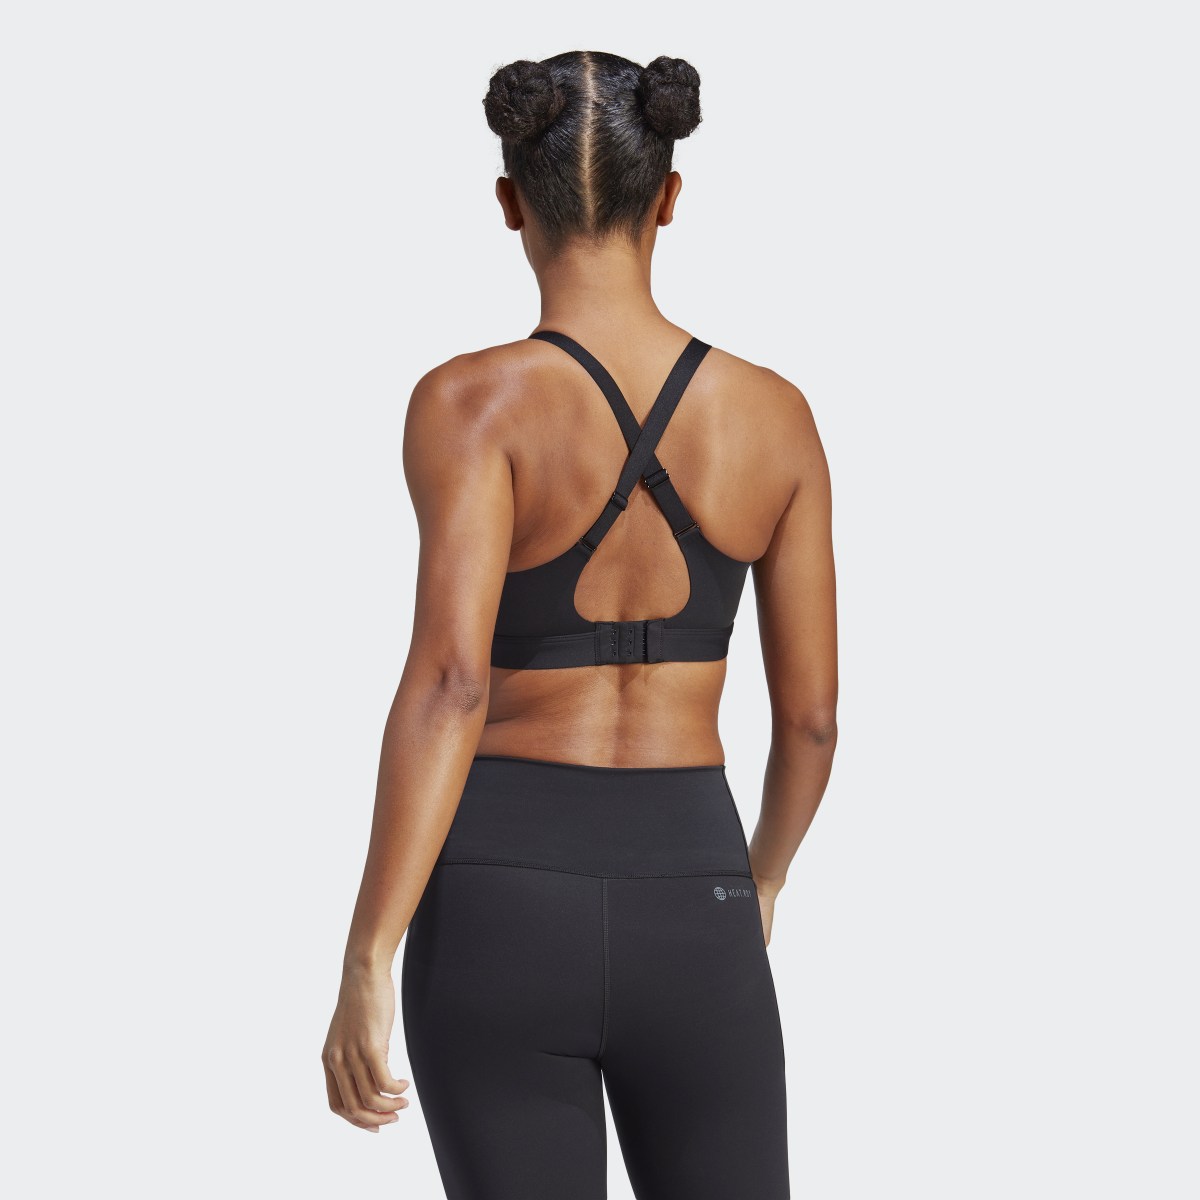 Adidas Brassière Tailored Impact Luxe Training Maintien fort. 5